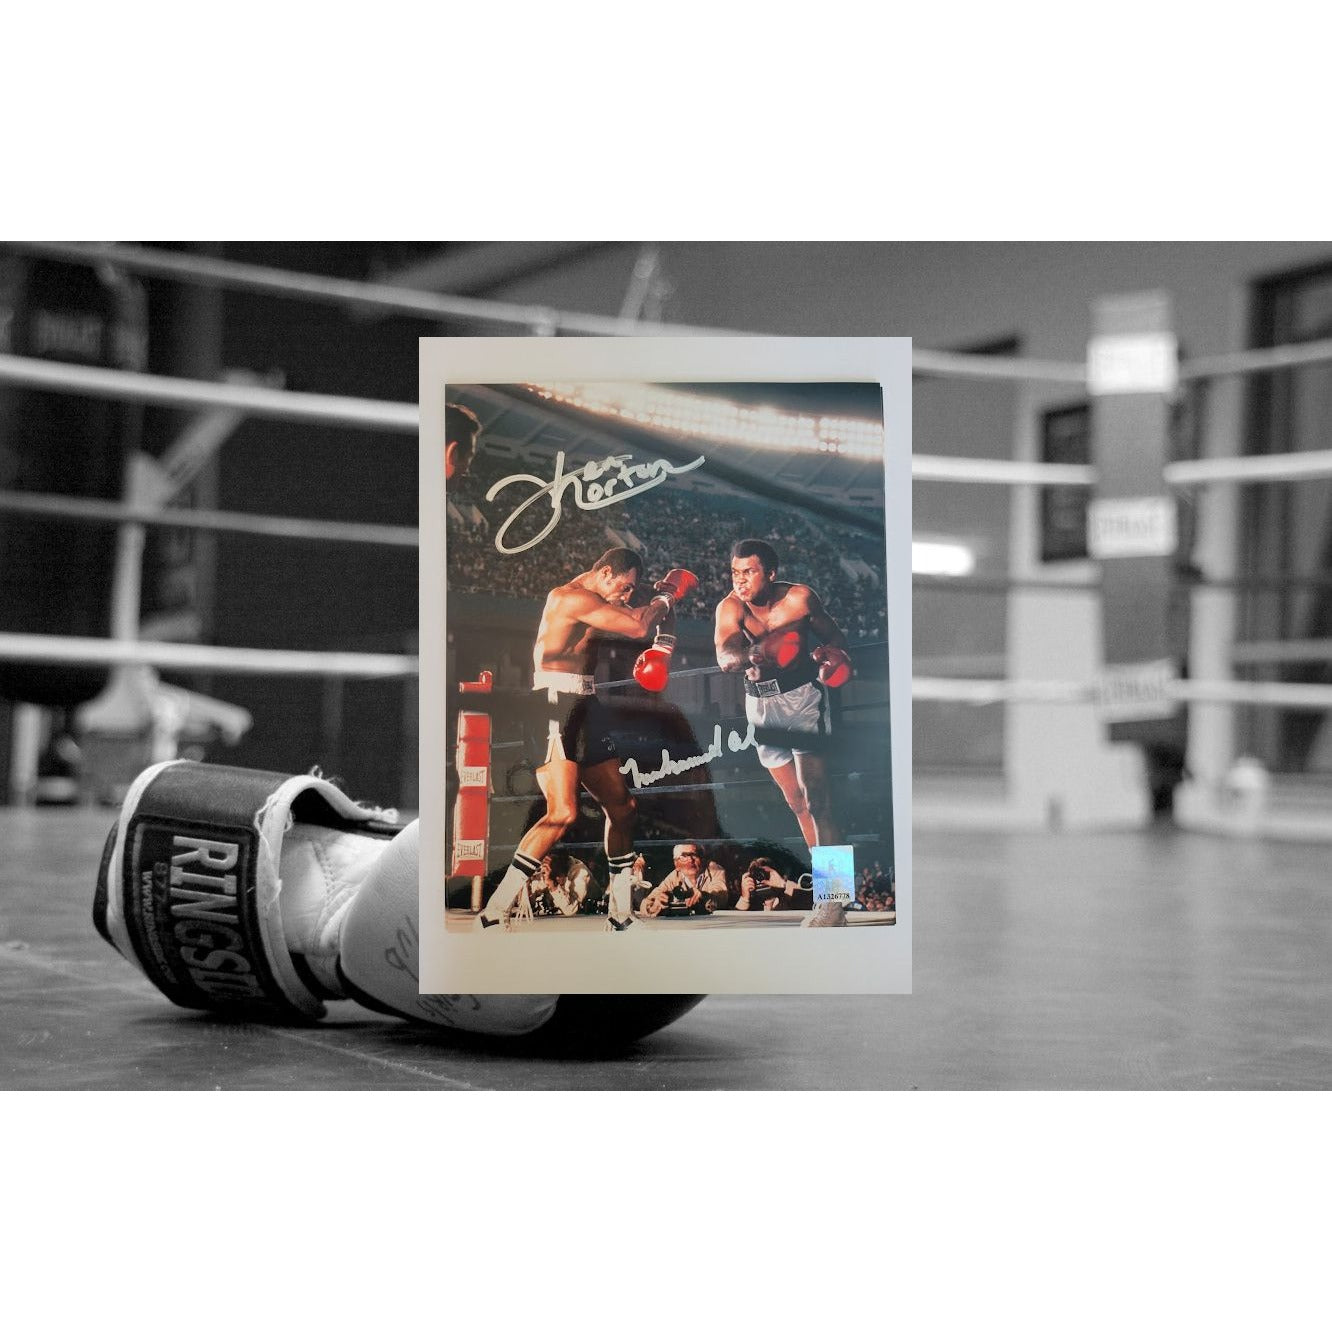 Ken Norton and Muhammad Ali 8 by 10 photo sign with proof